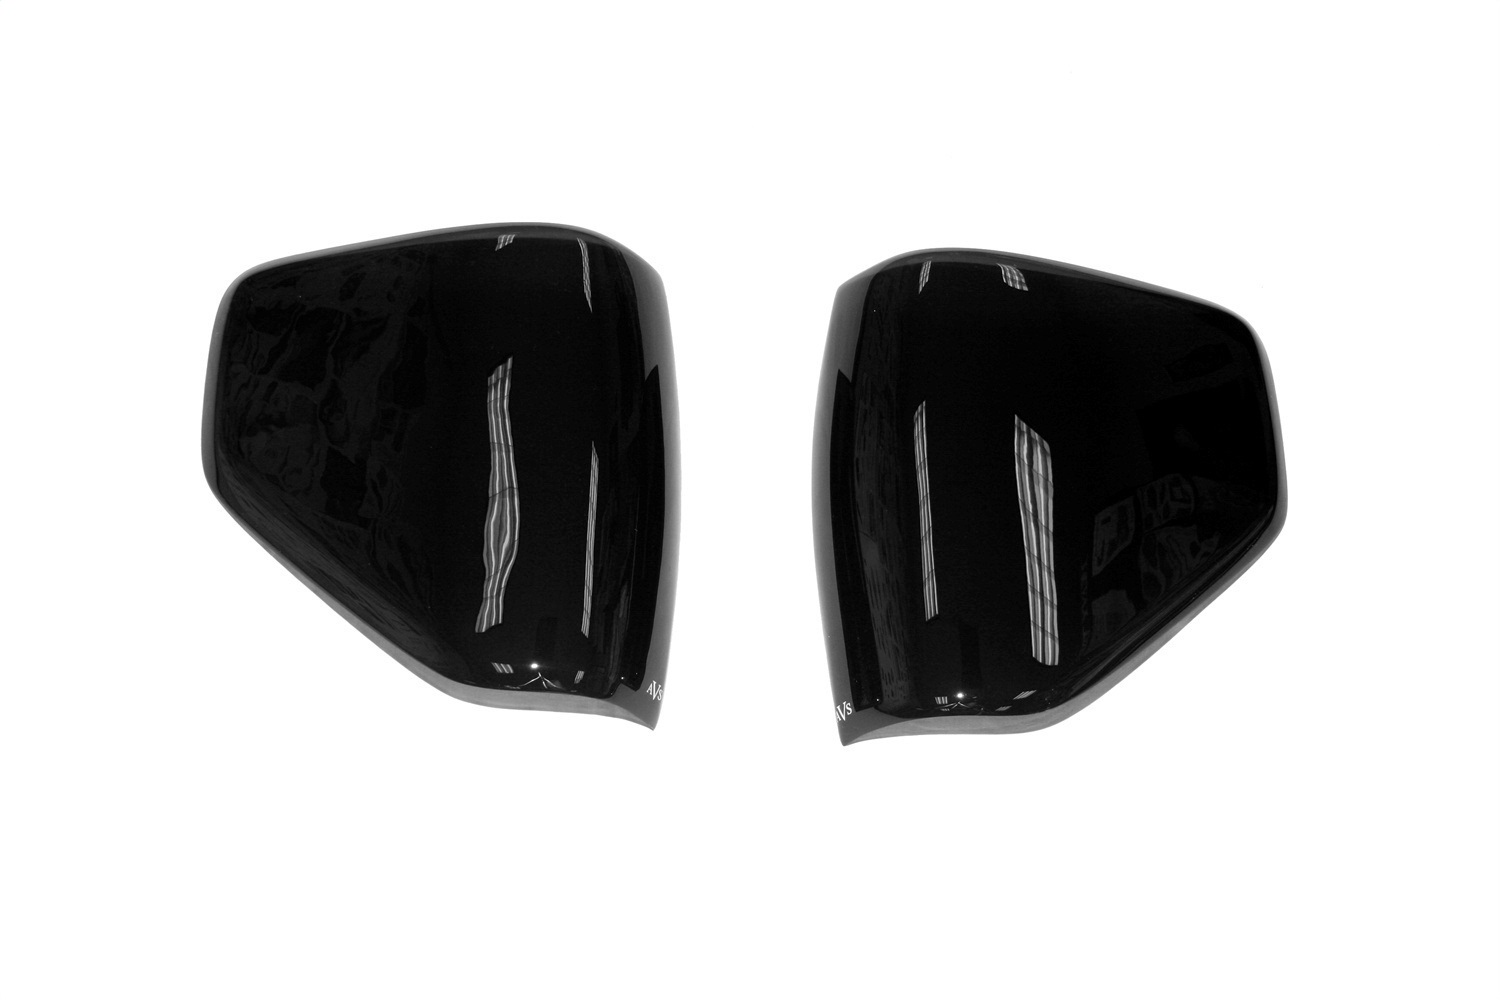 Auto Ventshade Auto Ventshade 33026 Tail Shades; Taillight Covers Fits 09-14 F-150